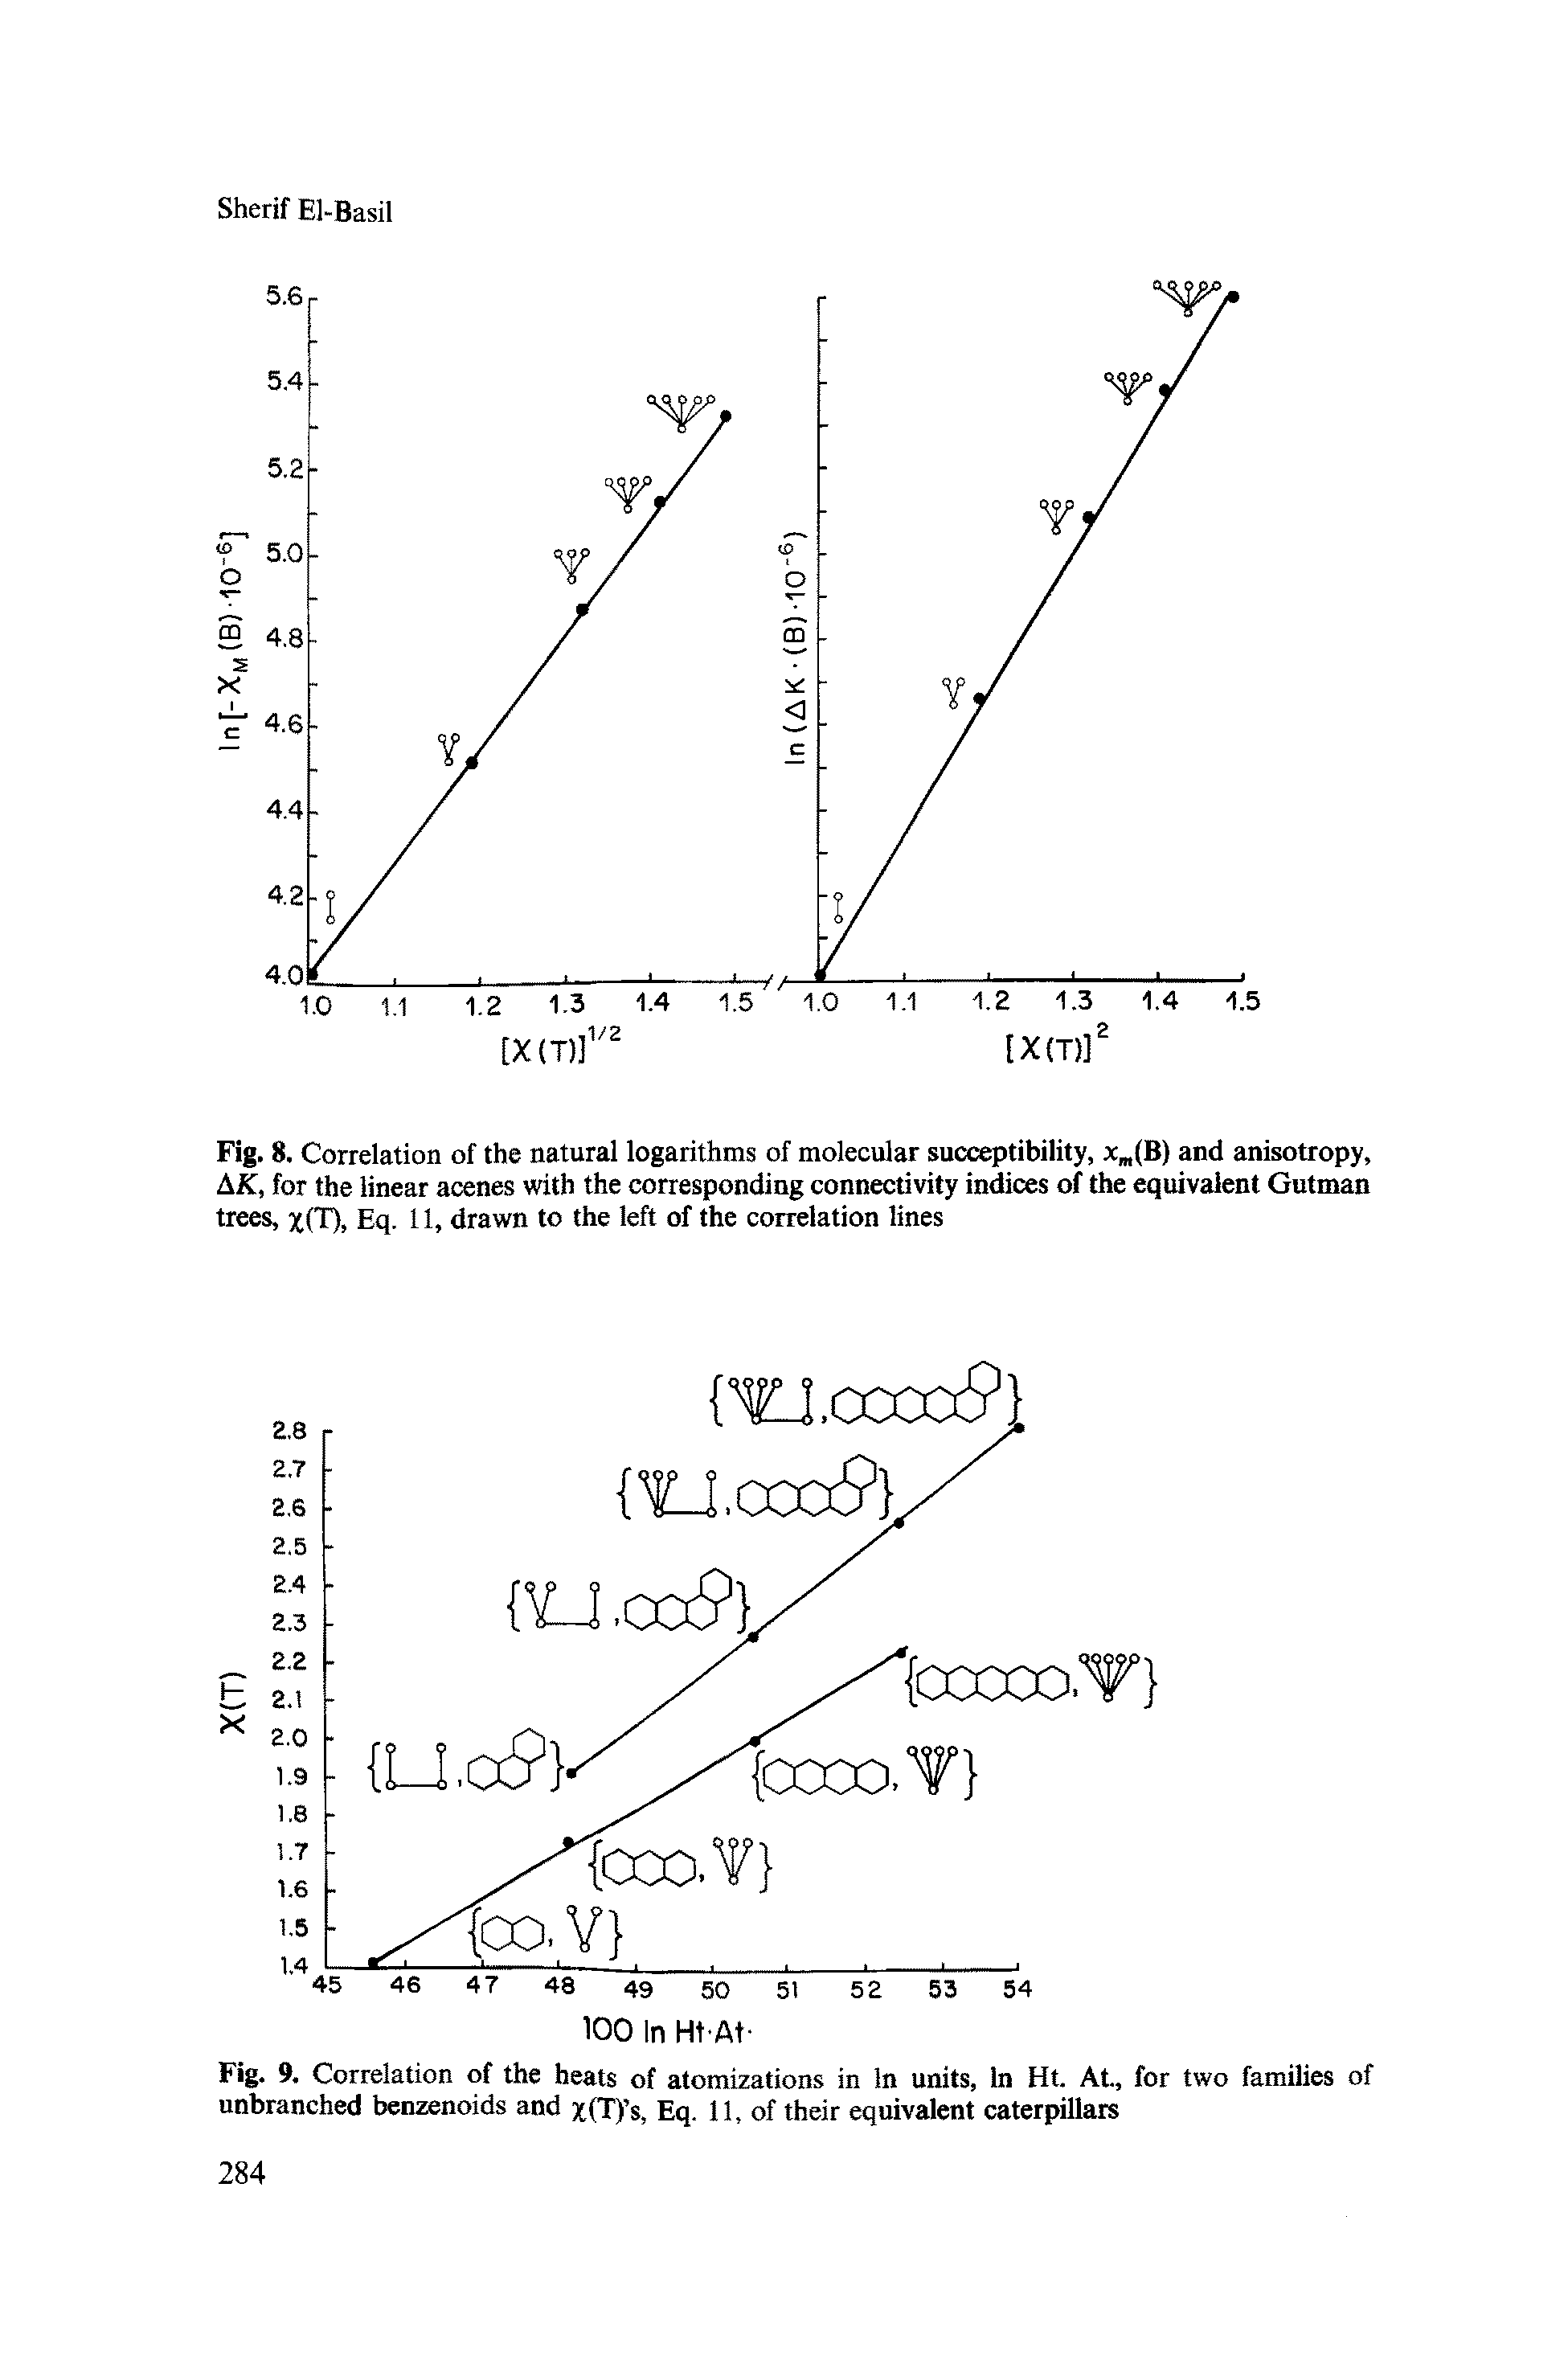 Fig. 8. Correlation of the natural logarithms of molecular succeptibility, xm(B) and anisotropy, AK, for the linear acenes with the corresponding connectivity indices of the equivalent Gutman trees, yJT), Eq. 11, drawn to the left of the correlation lines...